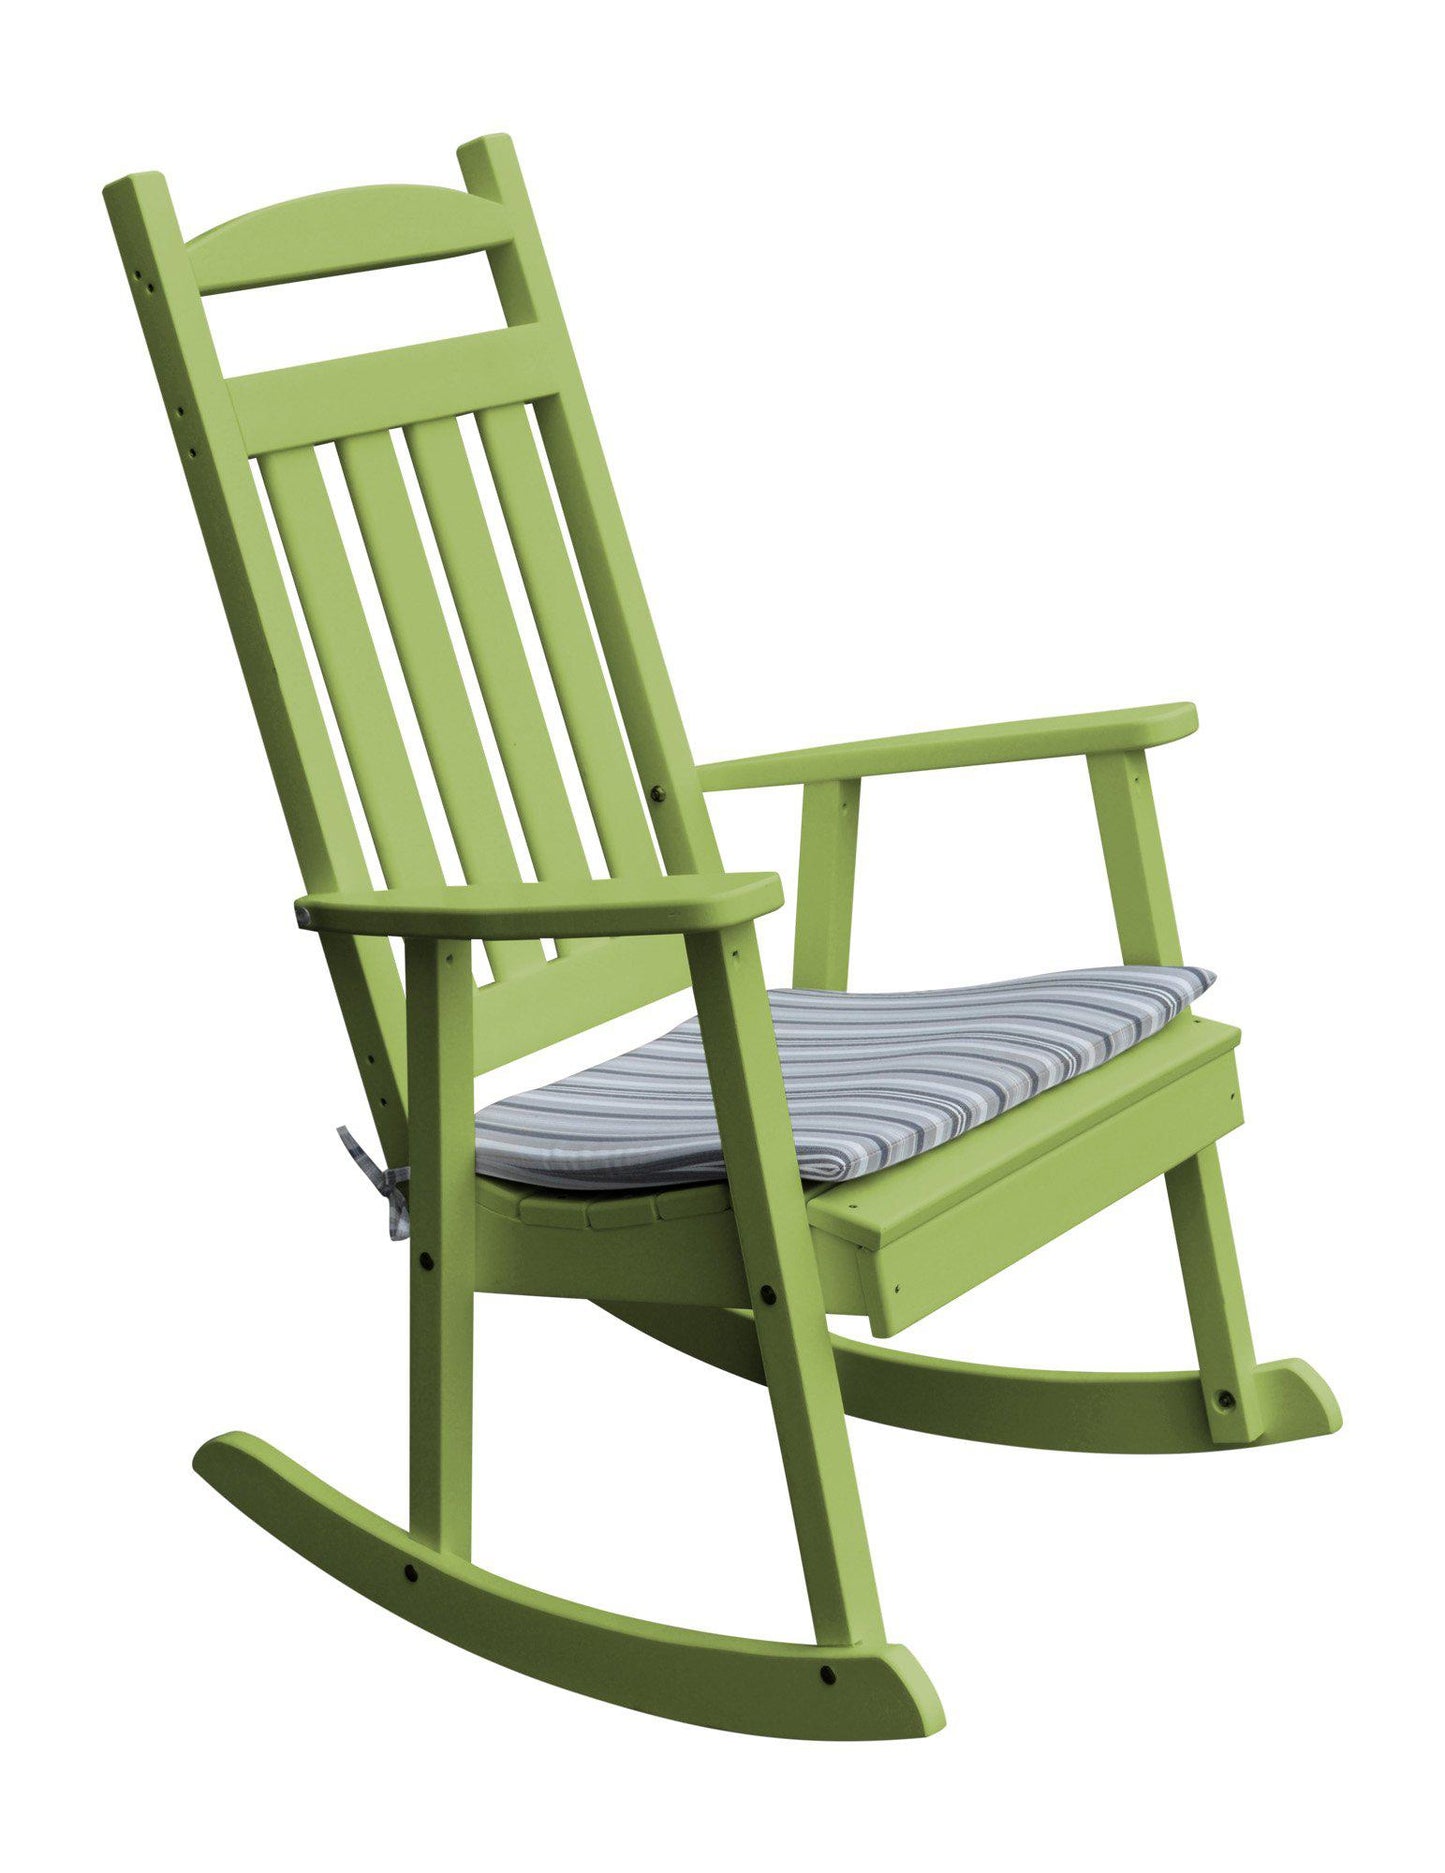 classic recycled plastic porch rocking chair tropical lime with rocker seat cushion